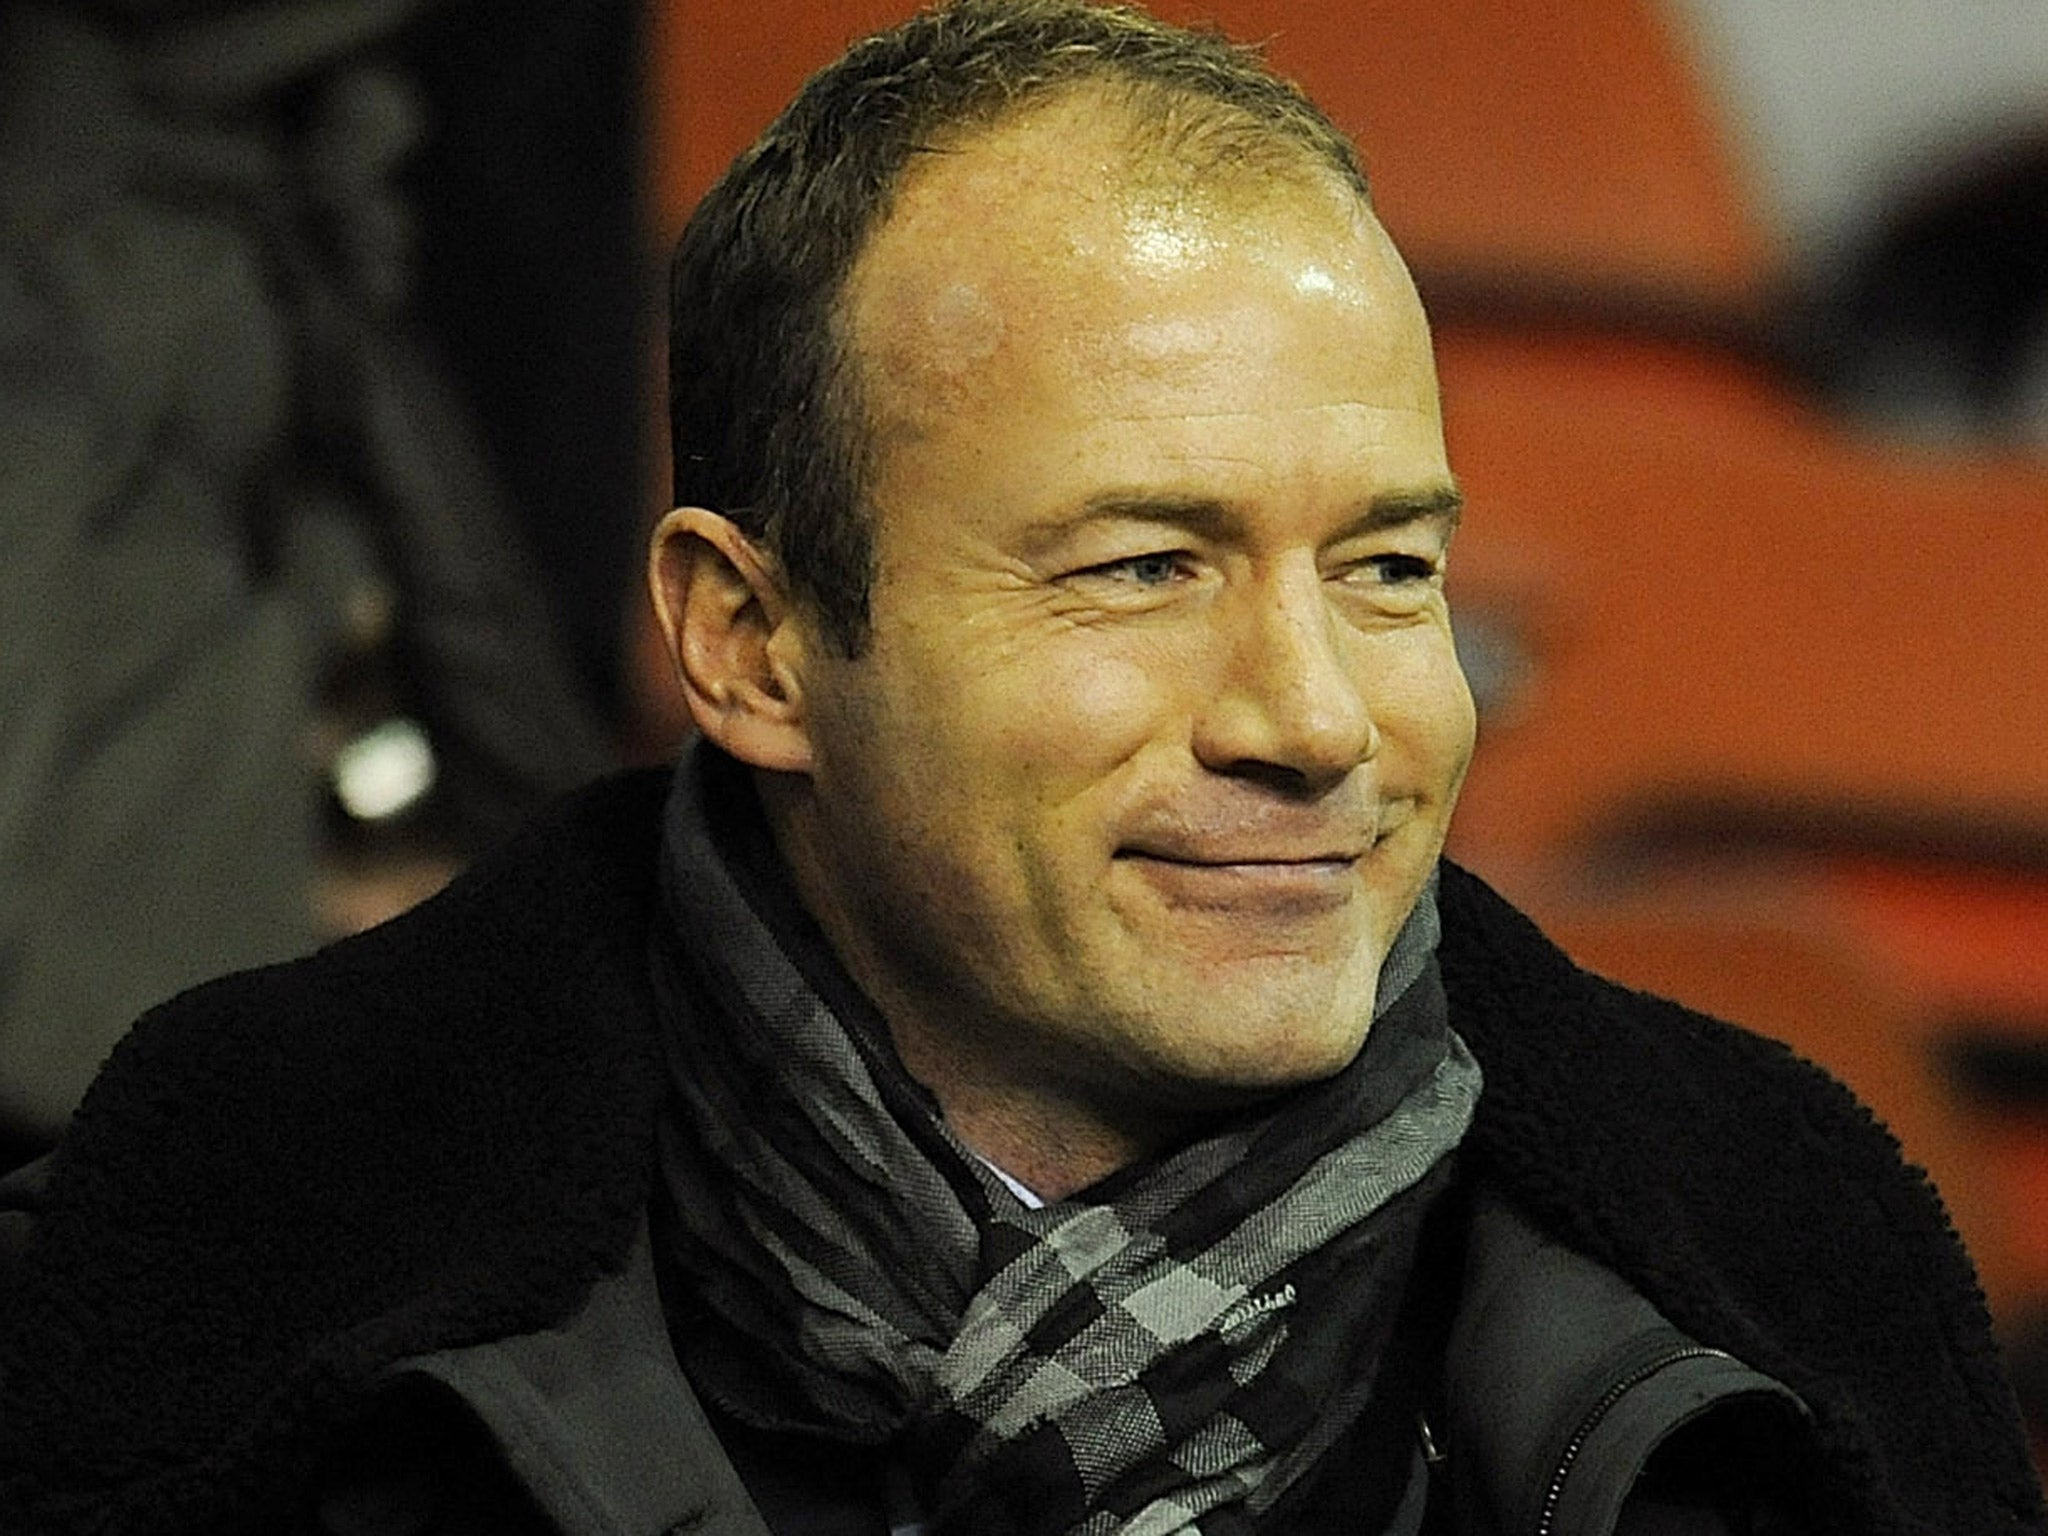 Alan Shearer wants to replace Roy Hodgson as England manager